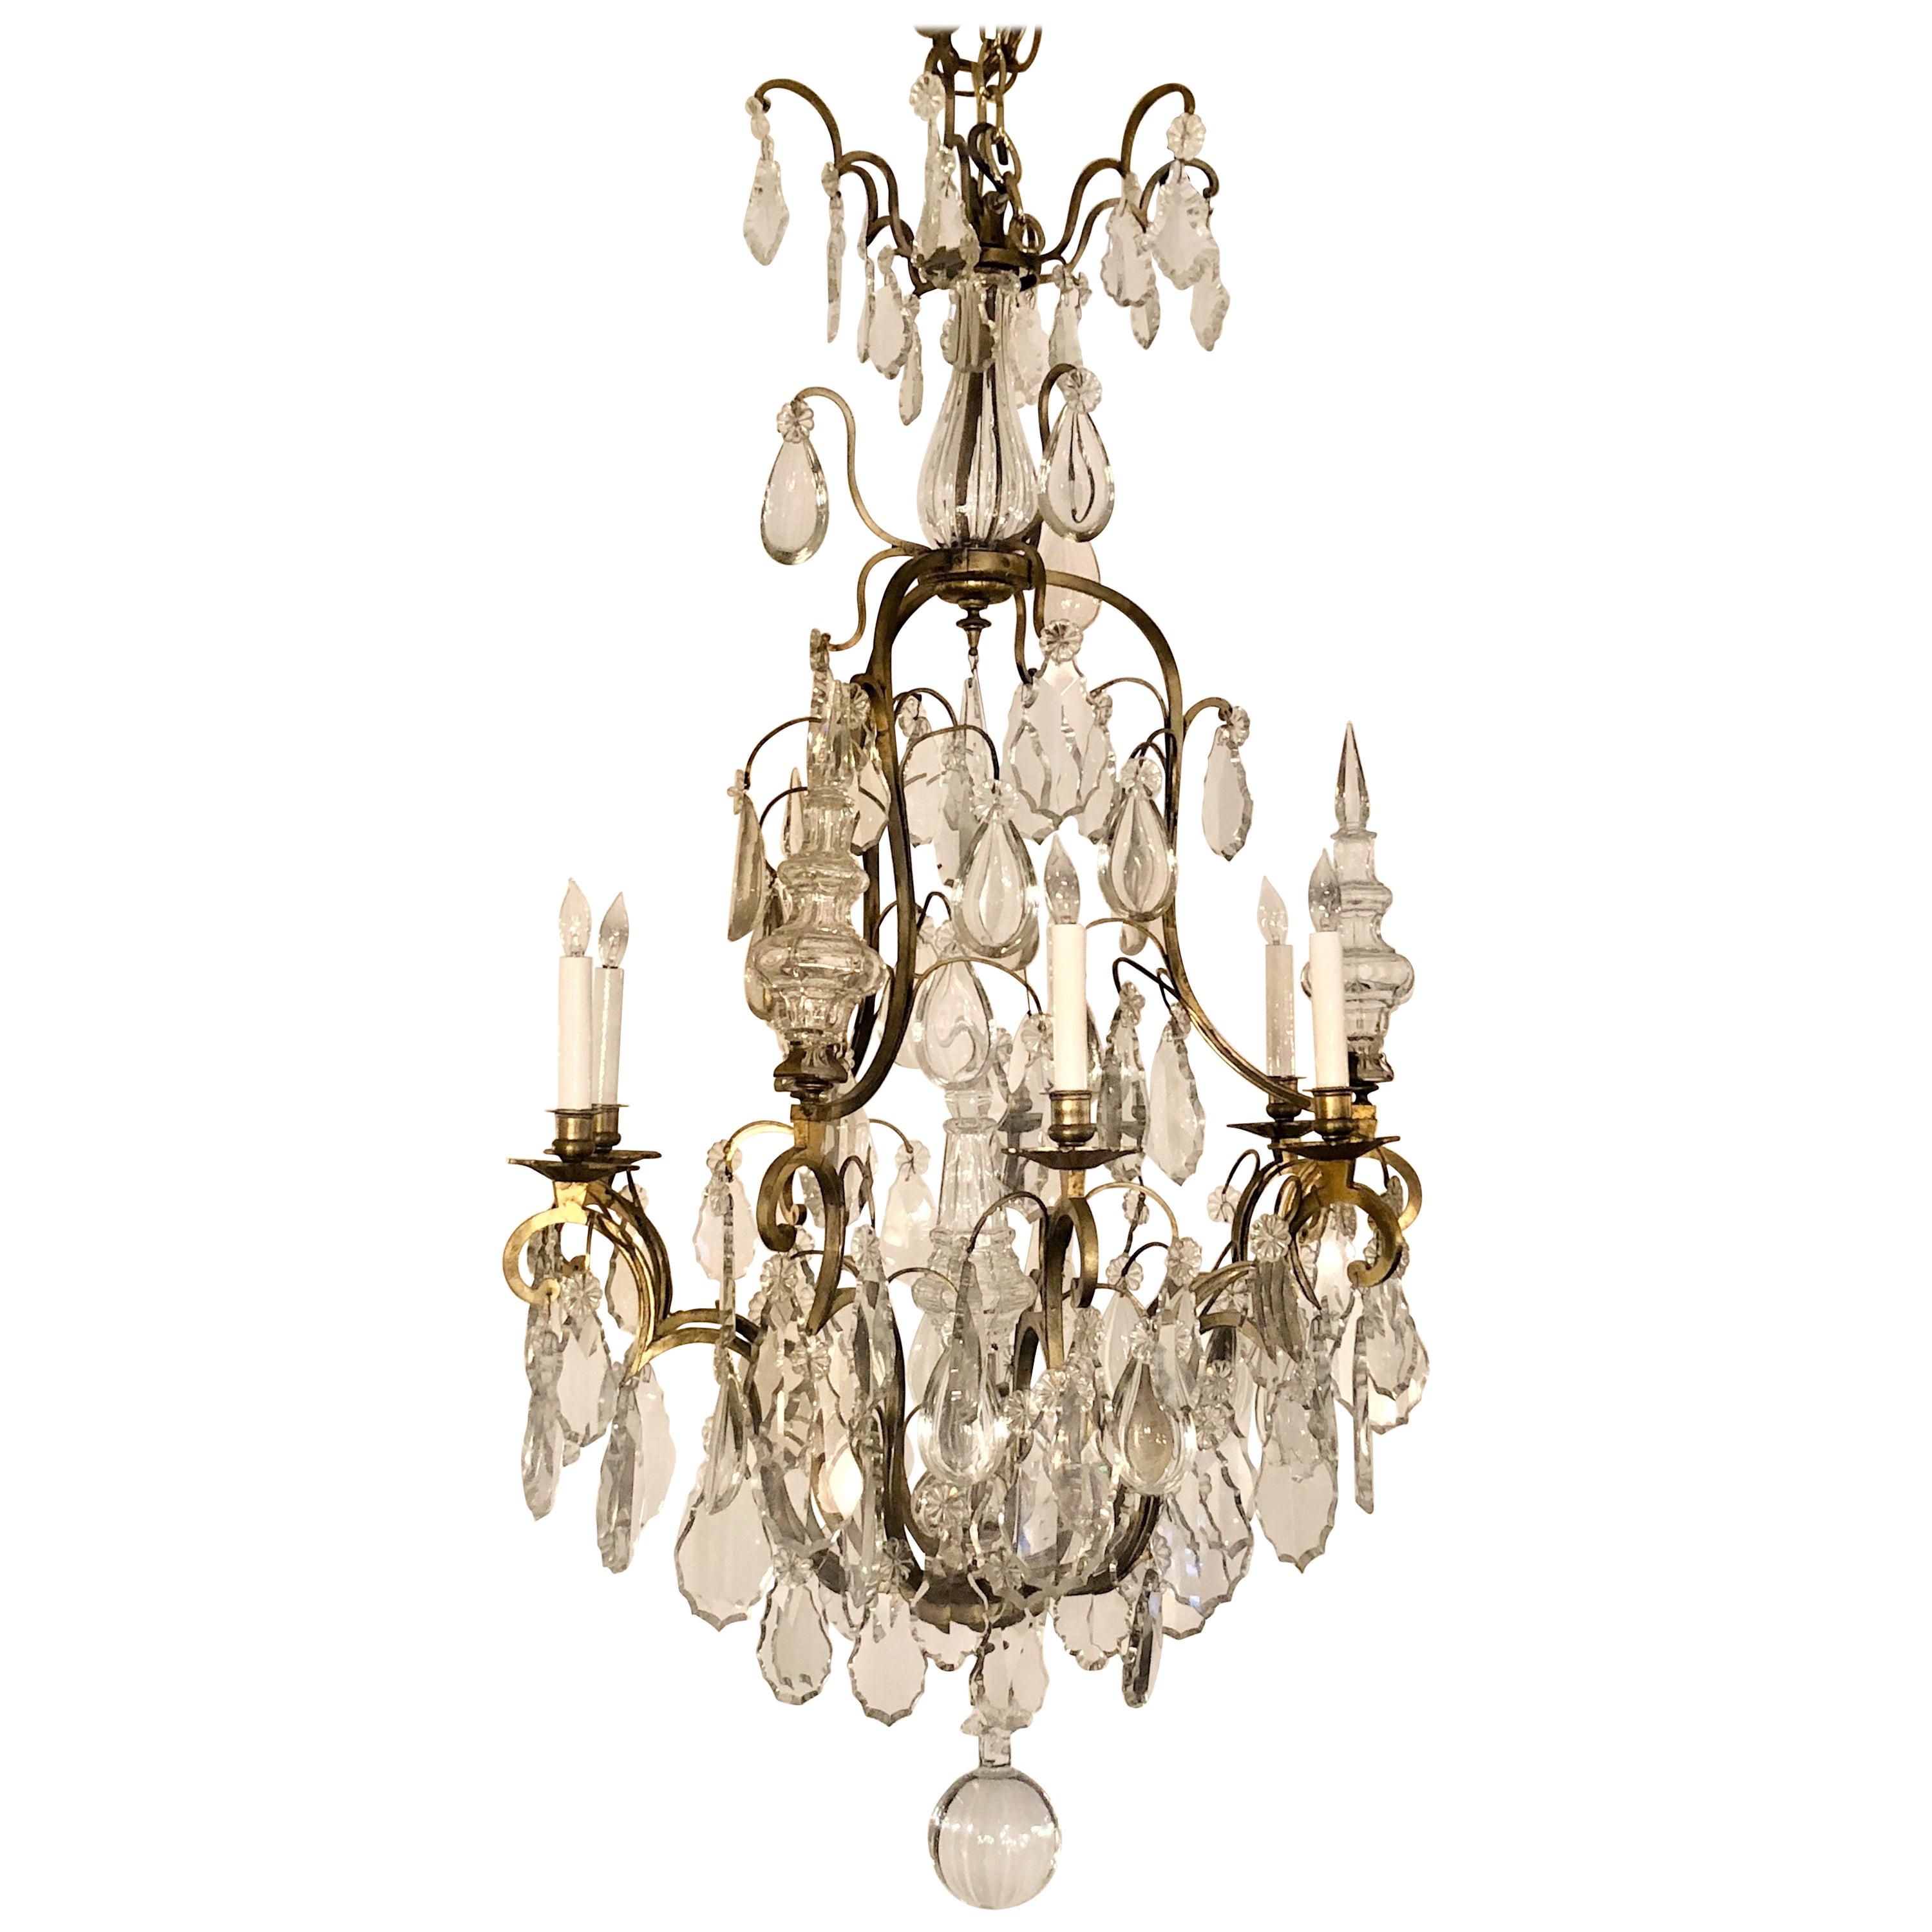 Antique French Baccarat Crystal and Bronze Chandelier, circa 1880